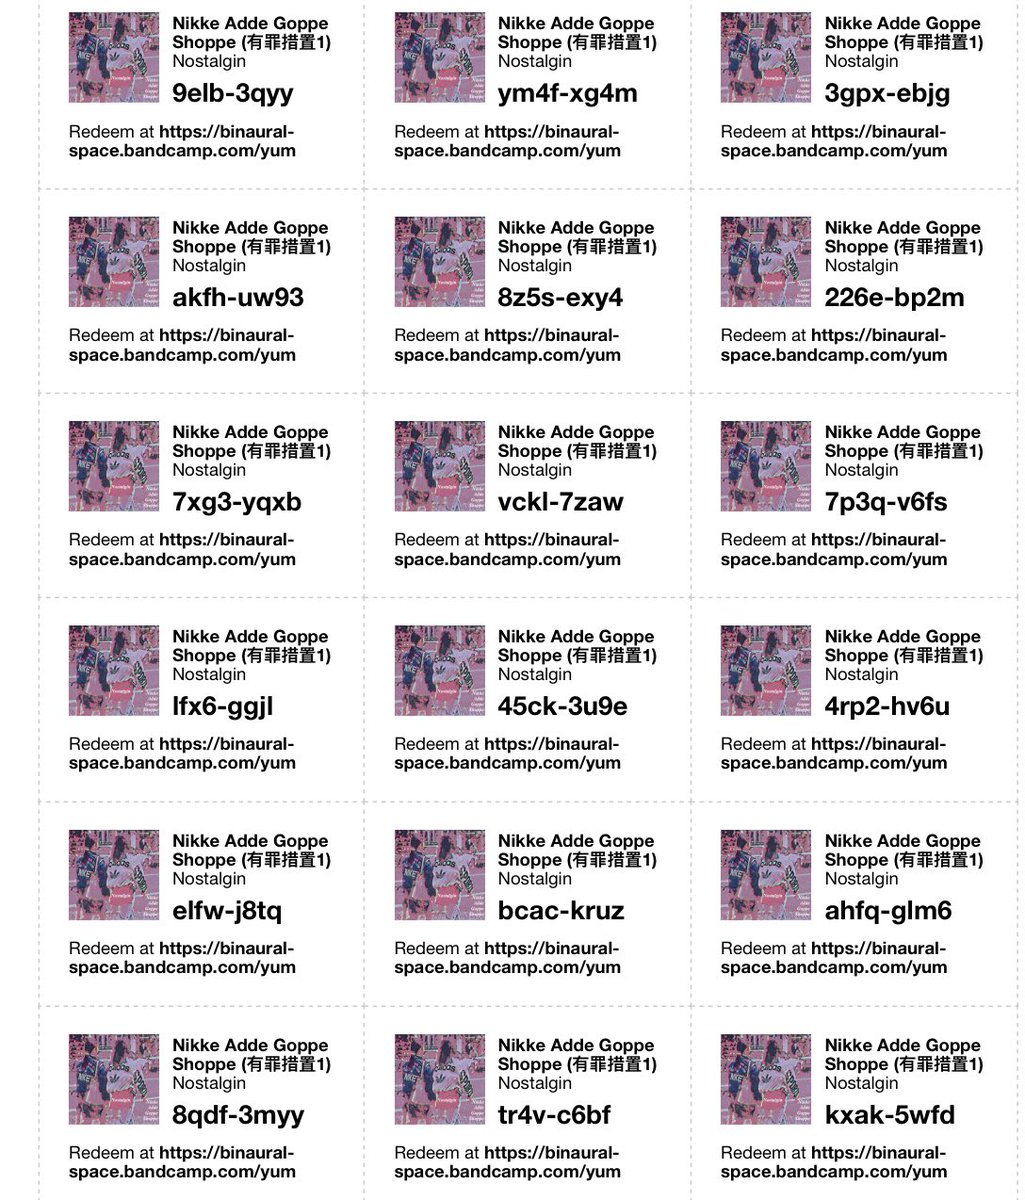 If you’re into vaporwave, there’s Nostalgin’s atmospheric Nikke Adde Goppe Shoppe.It represents mallwave, a lo-fi subgenre of vaporwave about abandoned 90’s malls.And you know what? Here you have some download codes so you can fall in love with it. https://binaural-space.bandcamp.com/album/nikke-adde-goppe-shoppe-1